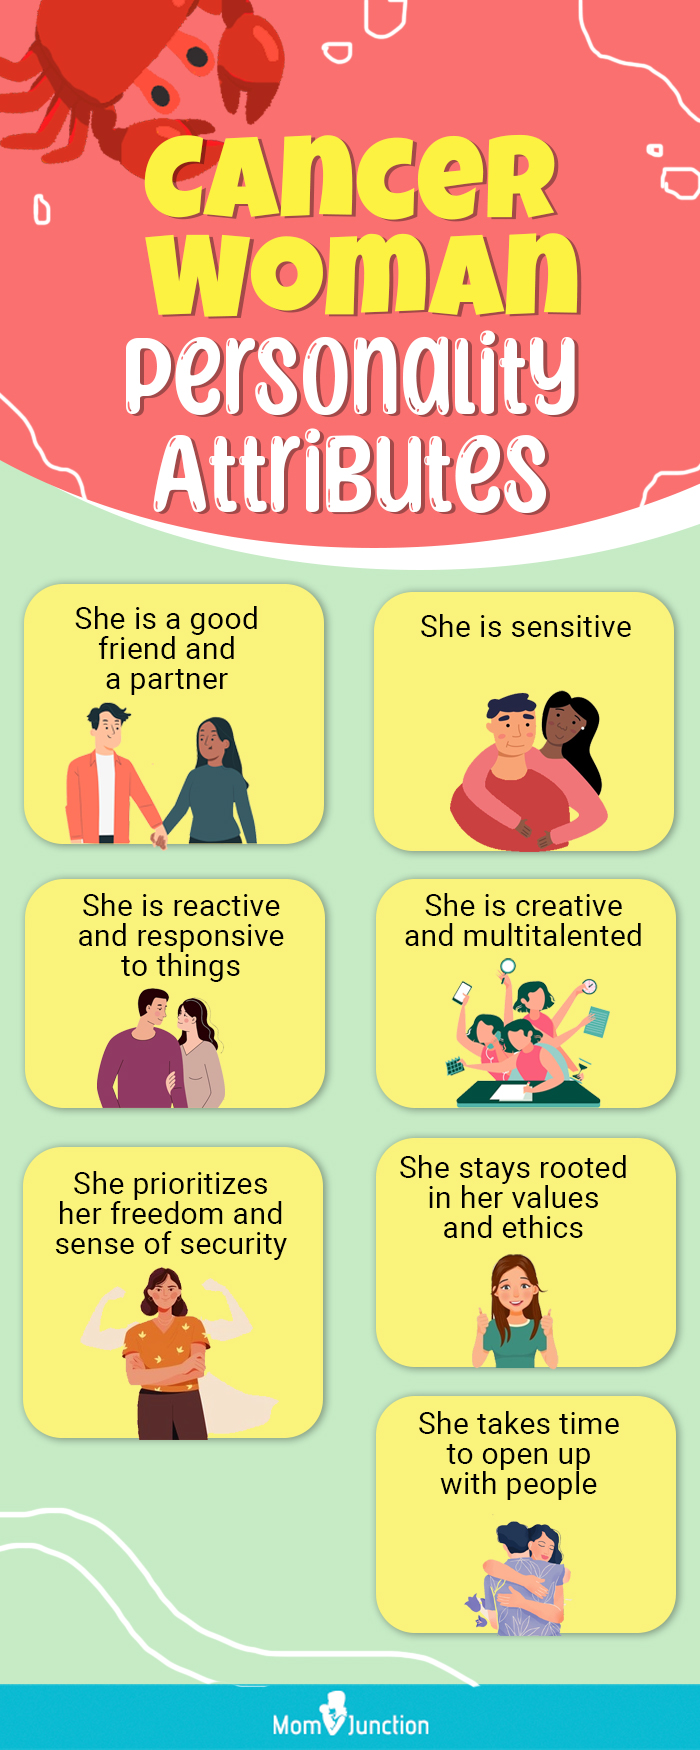 cancer woman personality attributes (infographic)